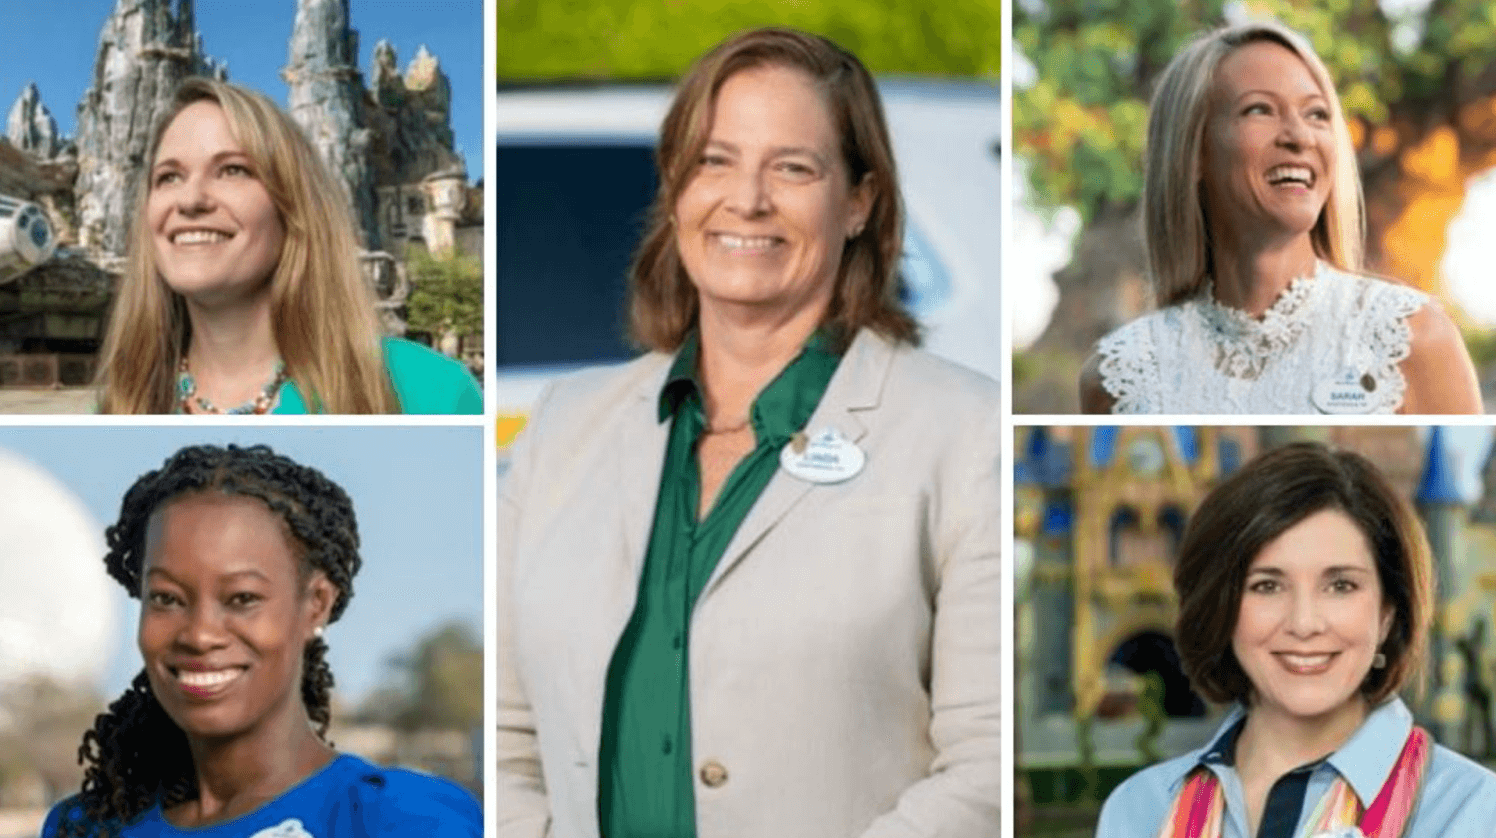 Five women breaking barriers and encouraging so many women at Walt Disney World to follow their dreams